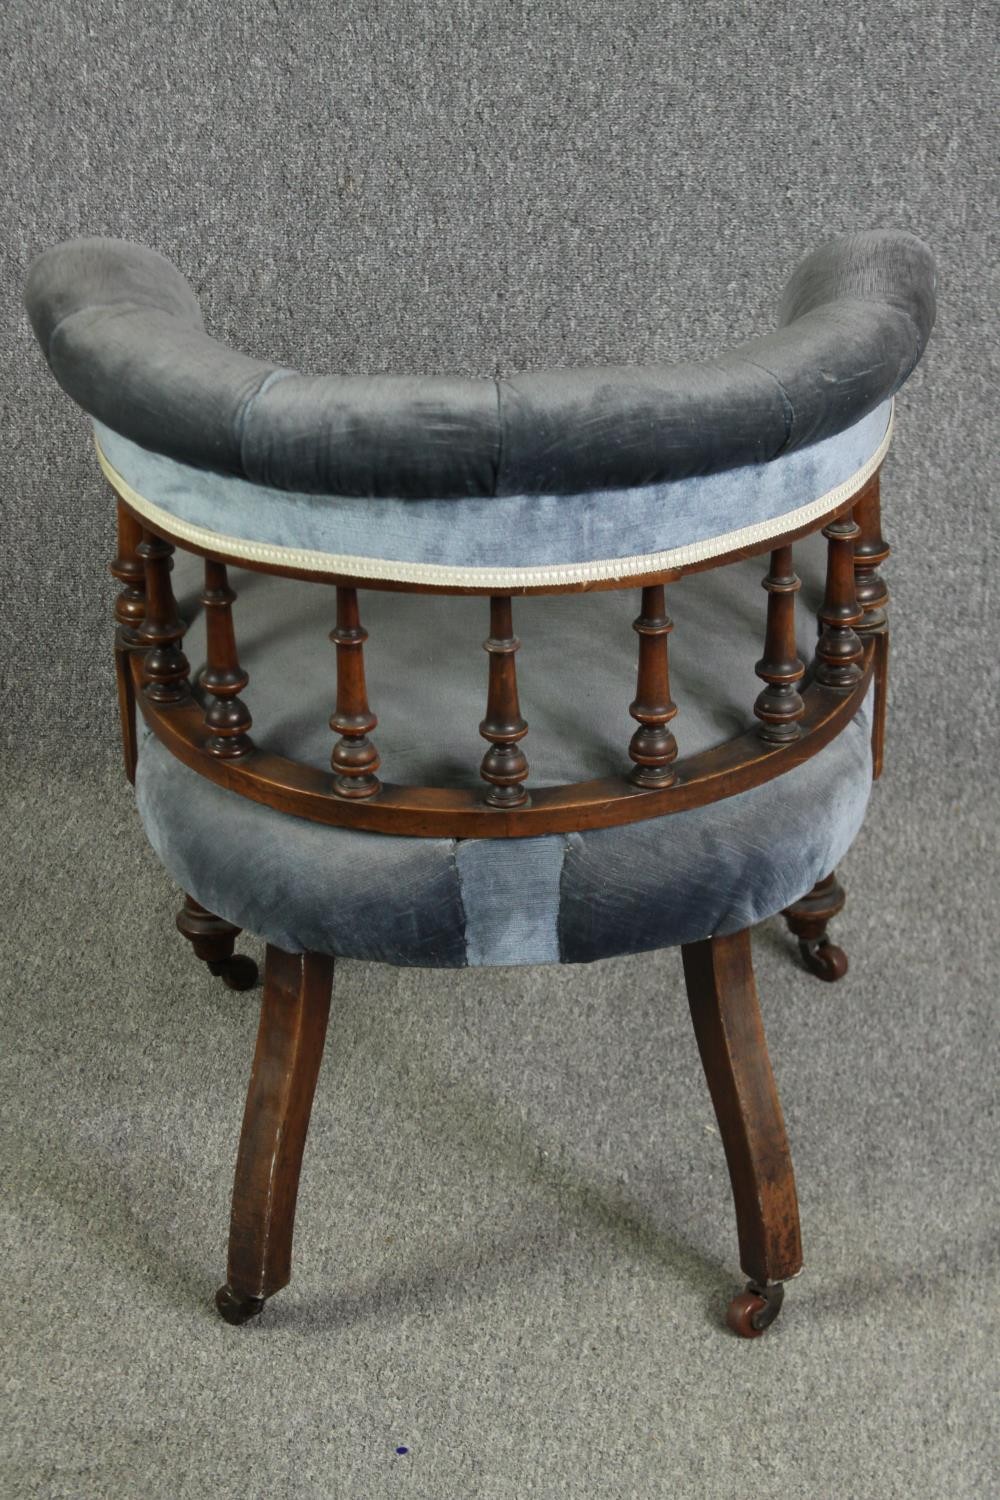 A late Victorian walnut tub chair, with button back upholstery - Image 4 of 7